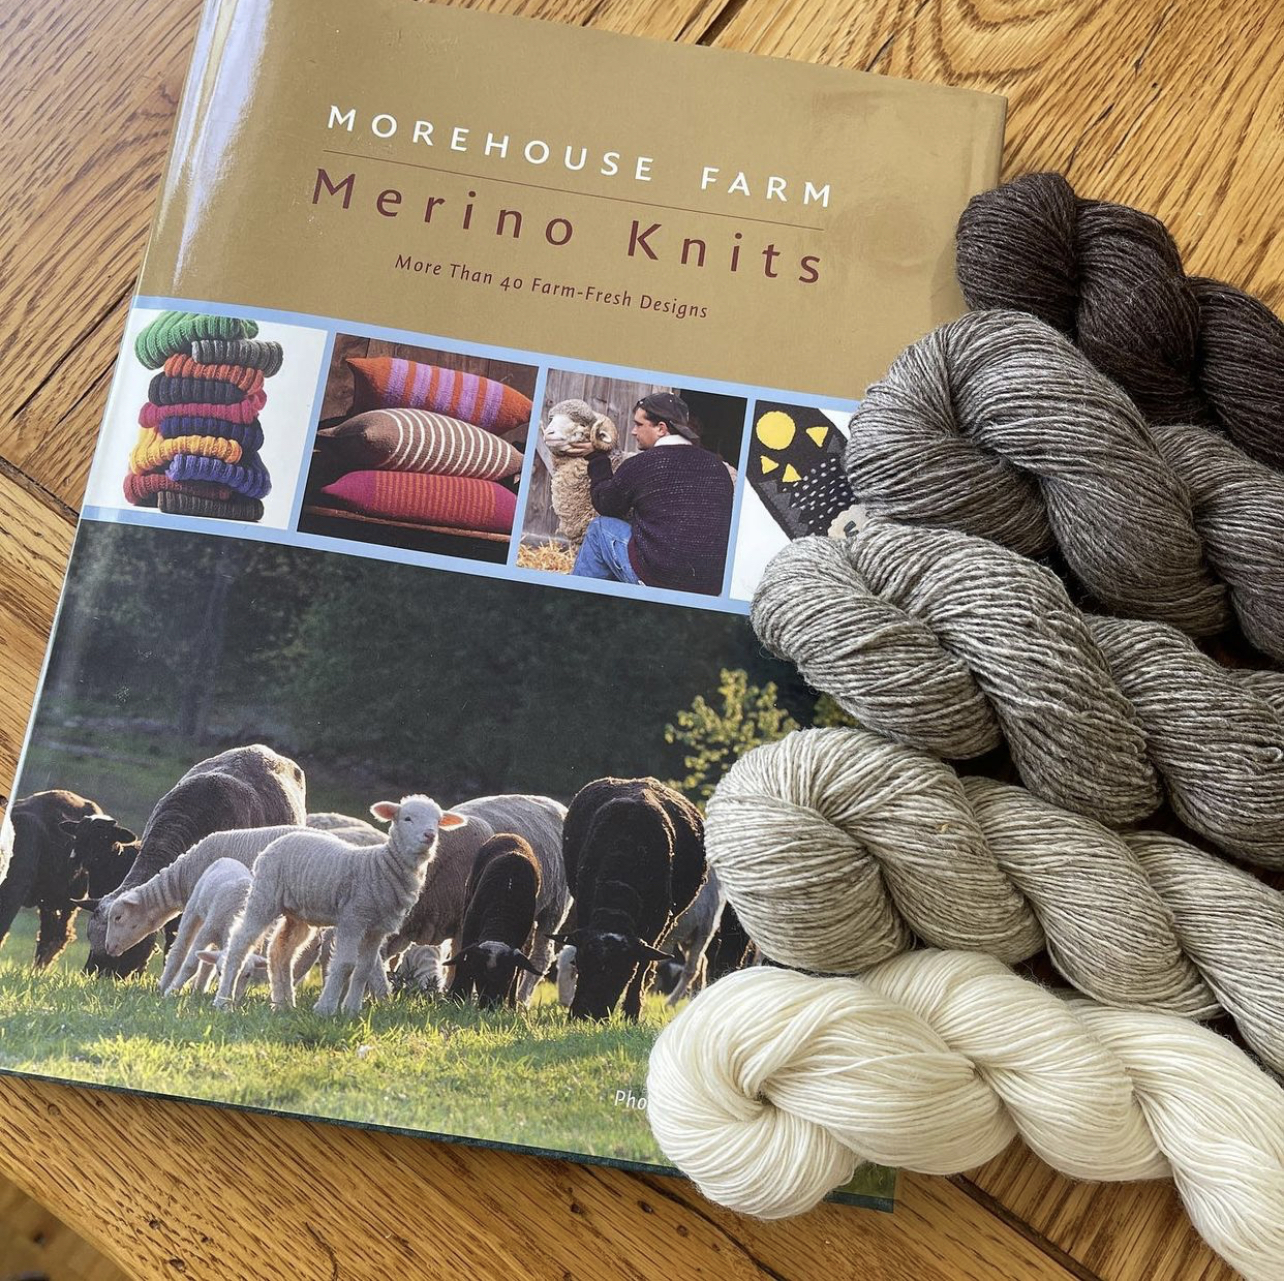 Hardcover book Morehouse Farm Merino Knits with 5 skeins of white to black wool singles yarn